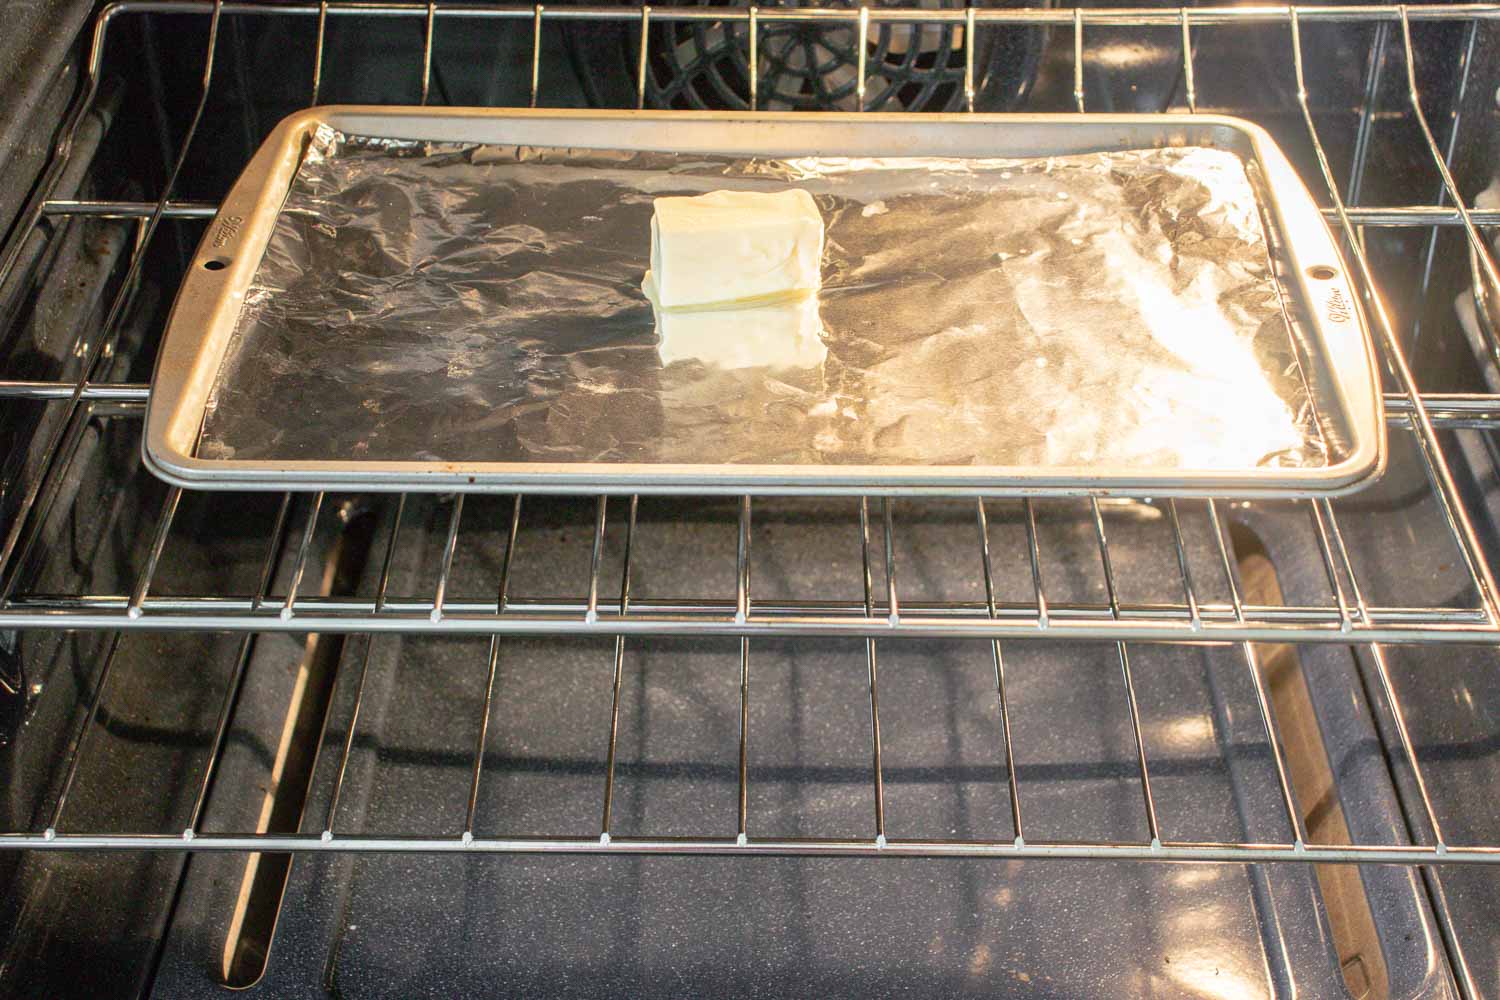 A metal pan with foil with a stick of butter on it in an oven.